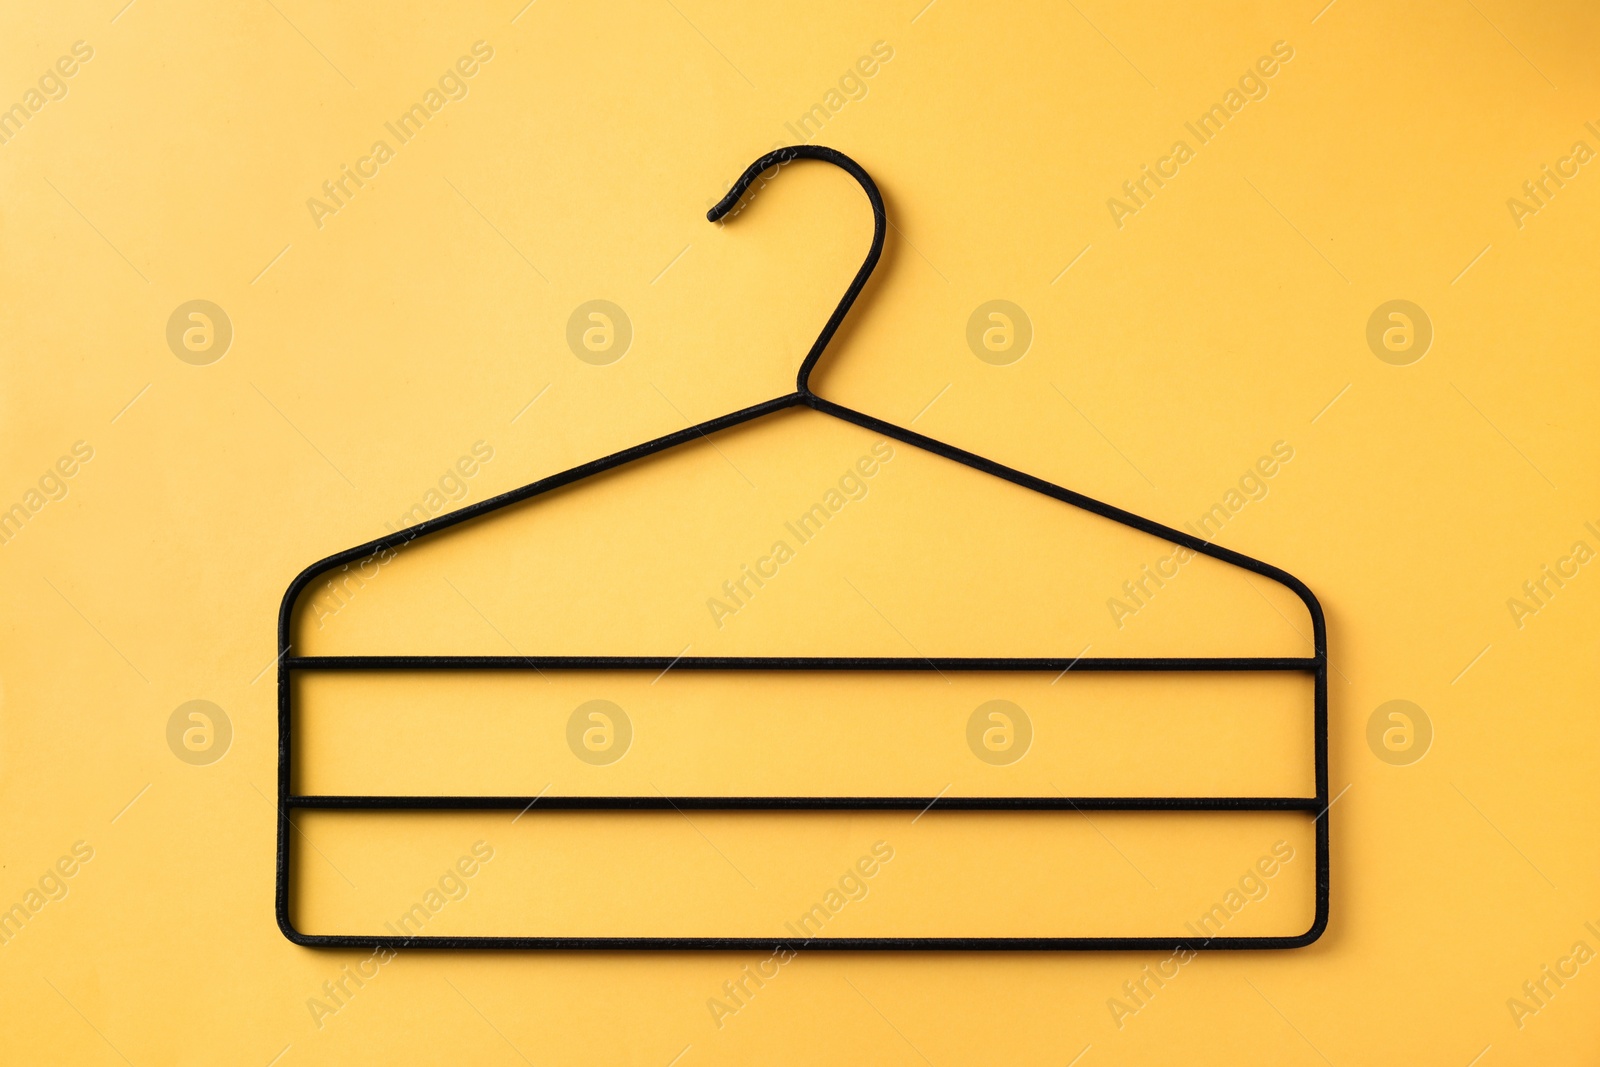 Photo of One black hanger on yellow background, top view